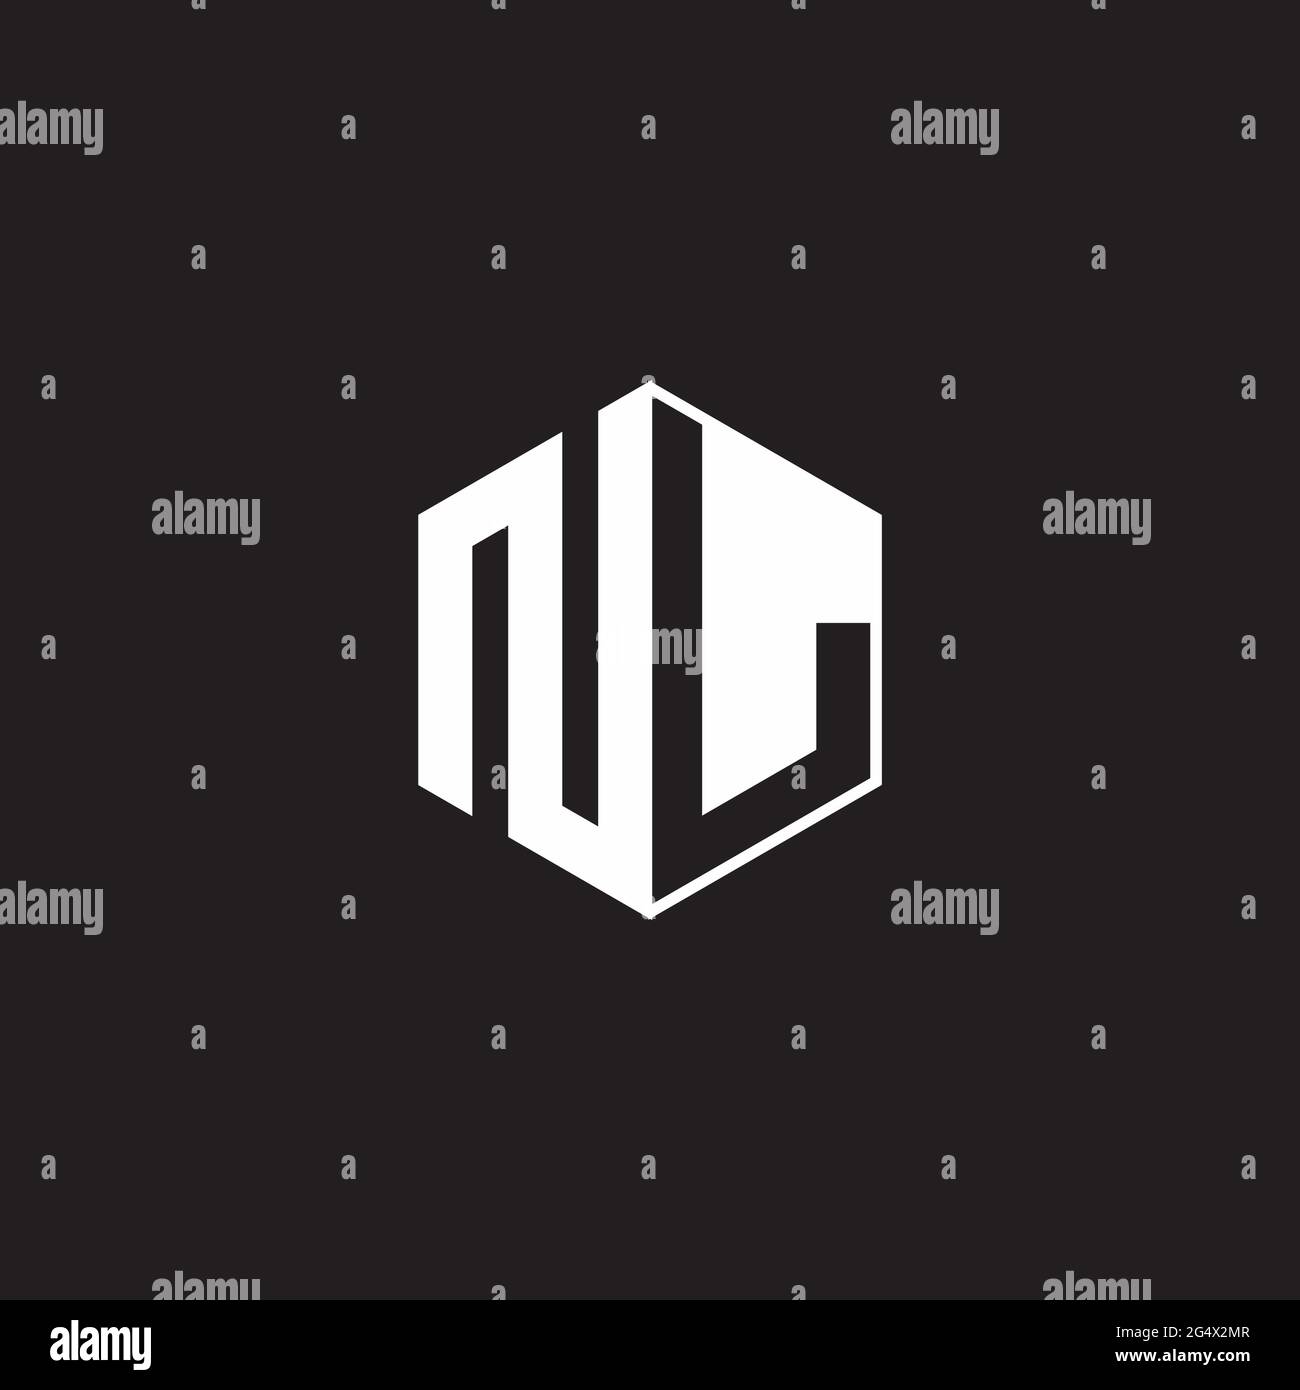 NL N L LN Logo monogram hexagon with black background negative space style Stock Vector